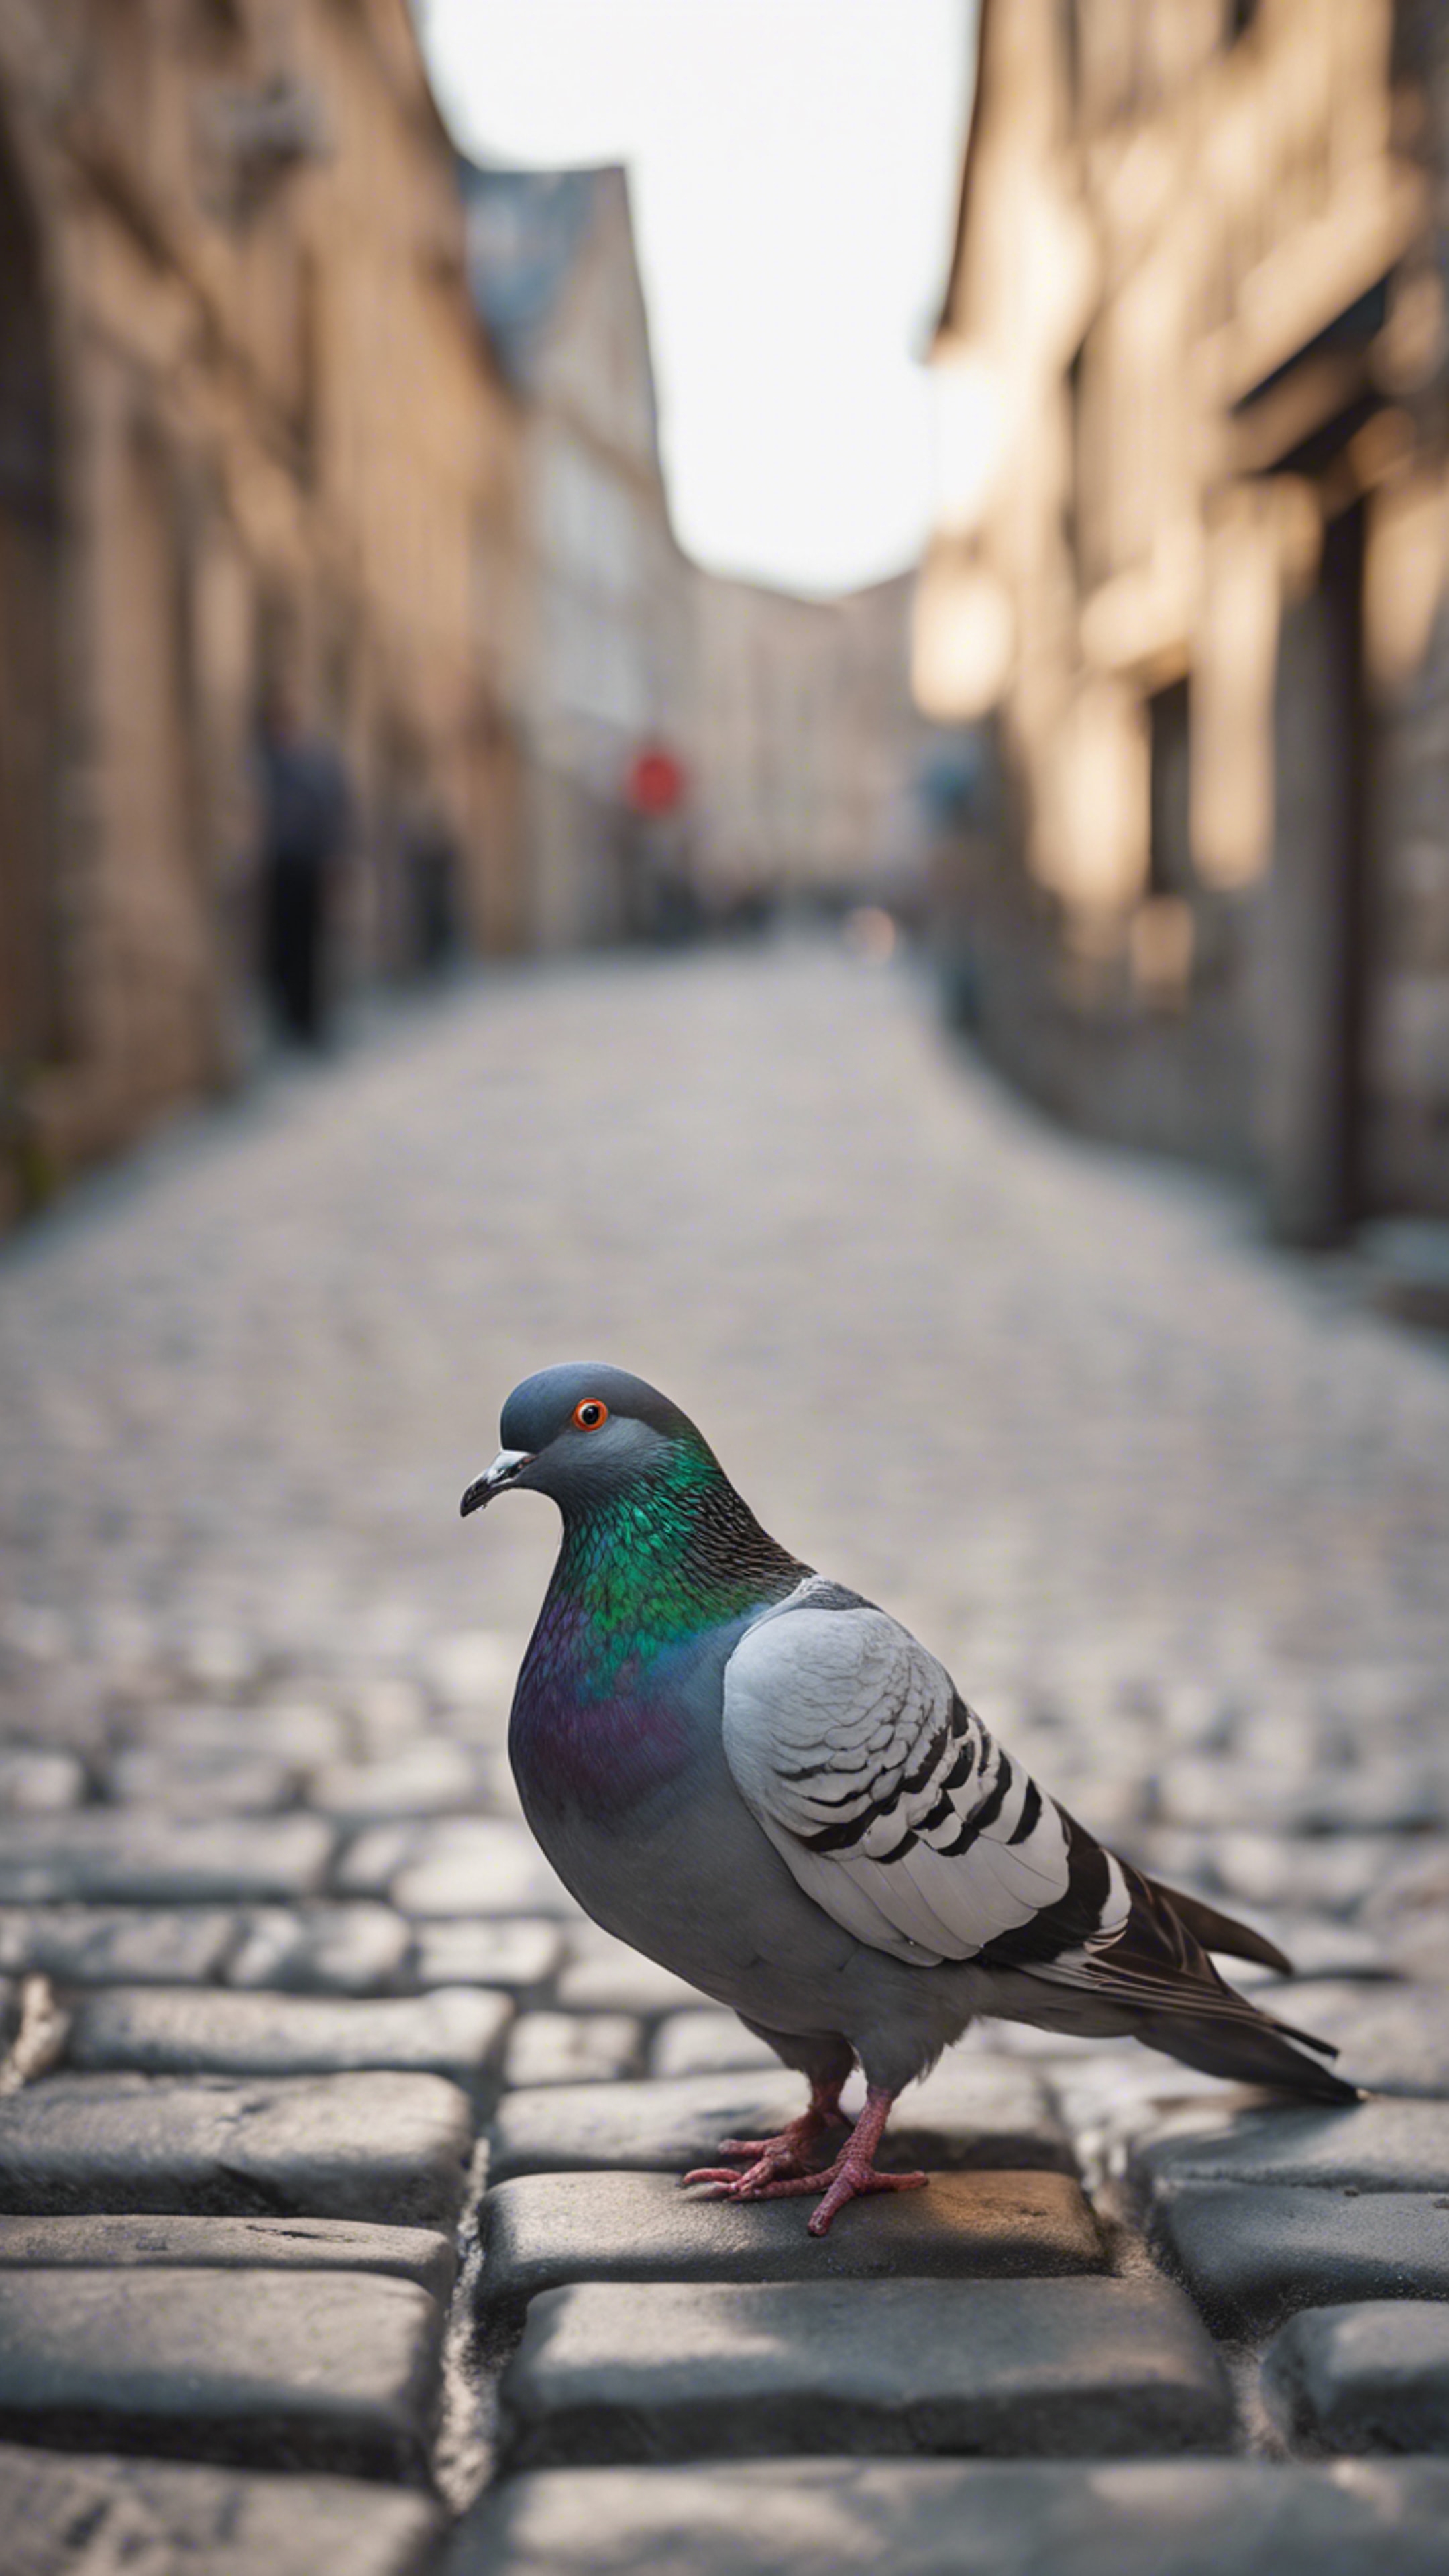 A pigeon standing on cobblestone street in the middle of an old city, its beautiful light gray plumage glistening. کاغذ دیواری[03a93bb4226c4140ad33]